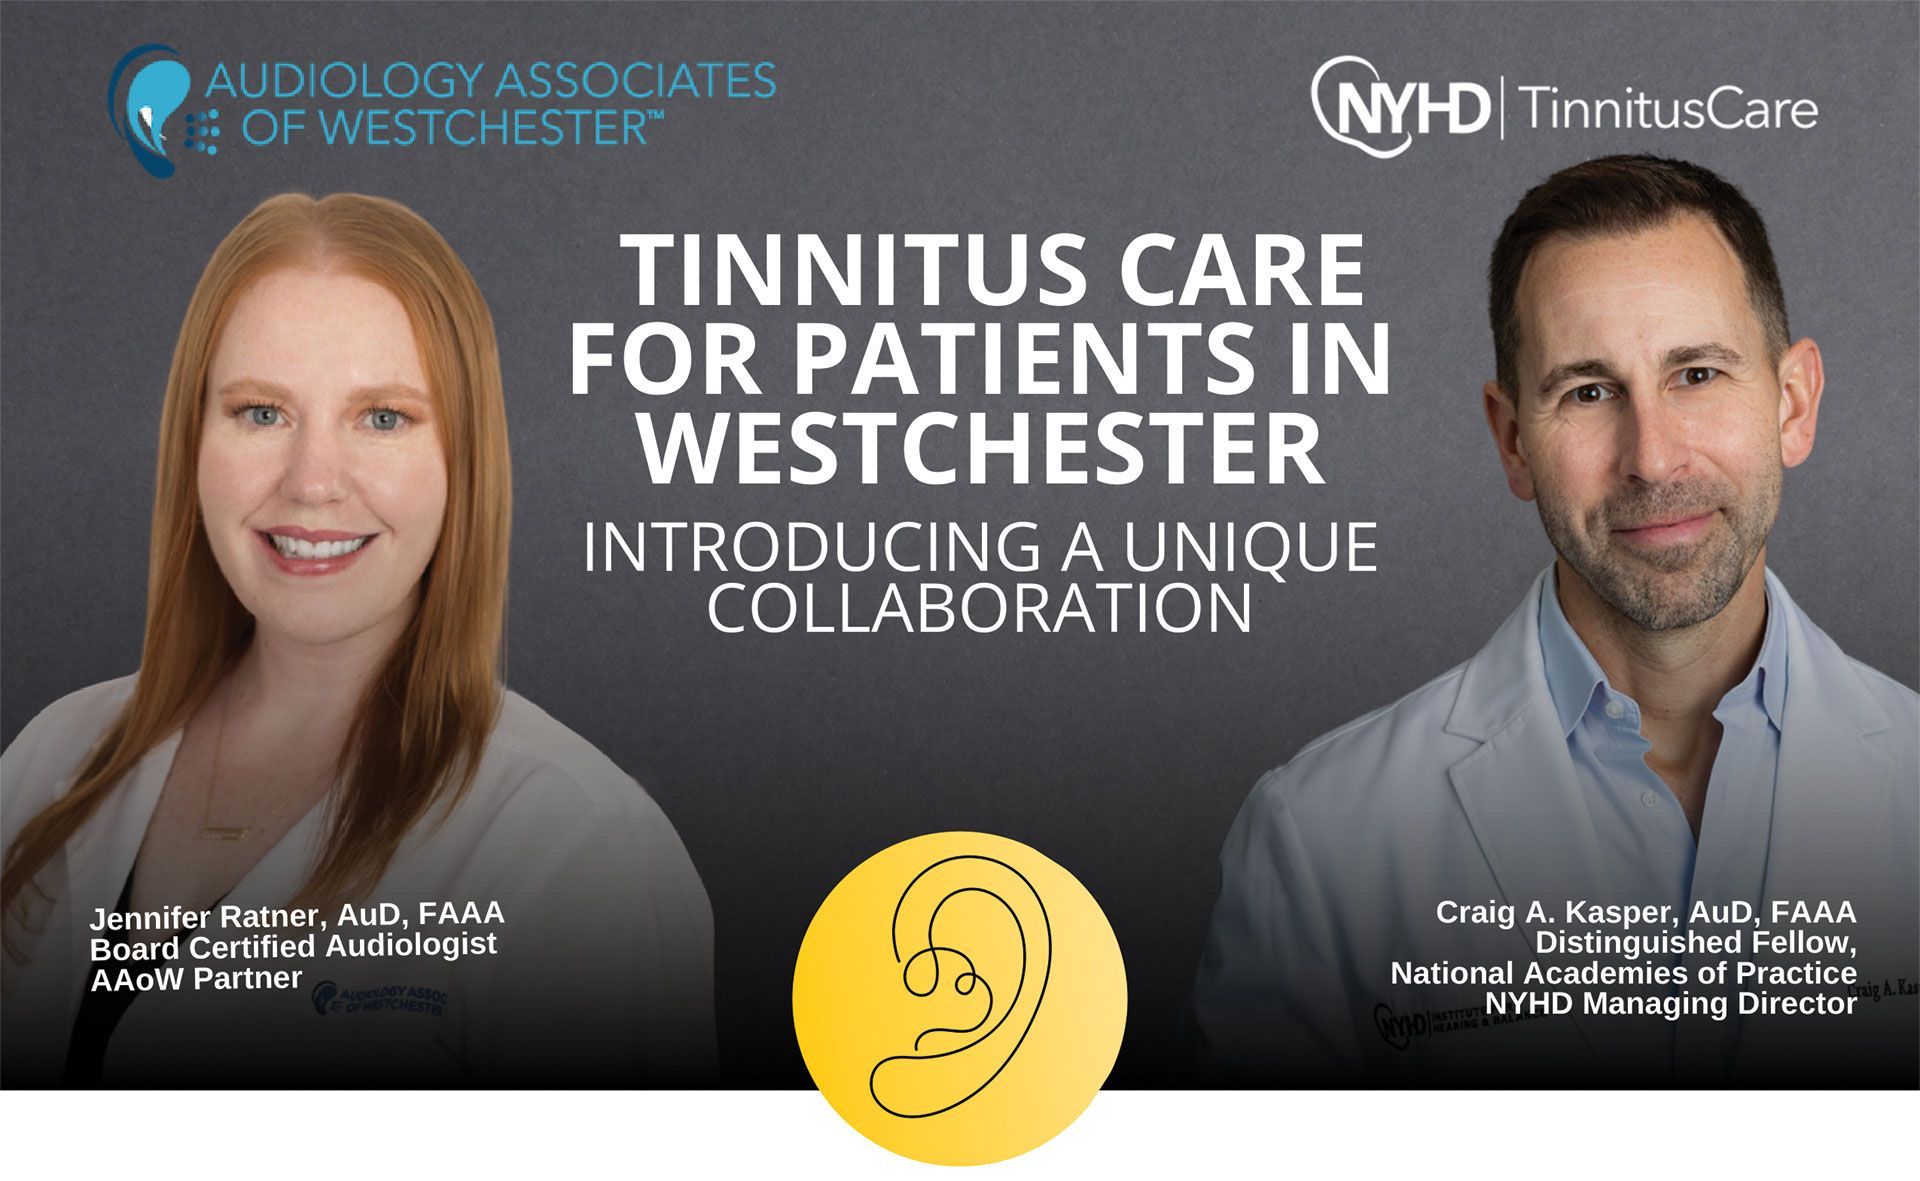 AAOW with Tinnitus Care announcement